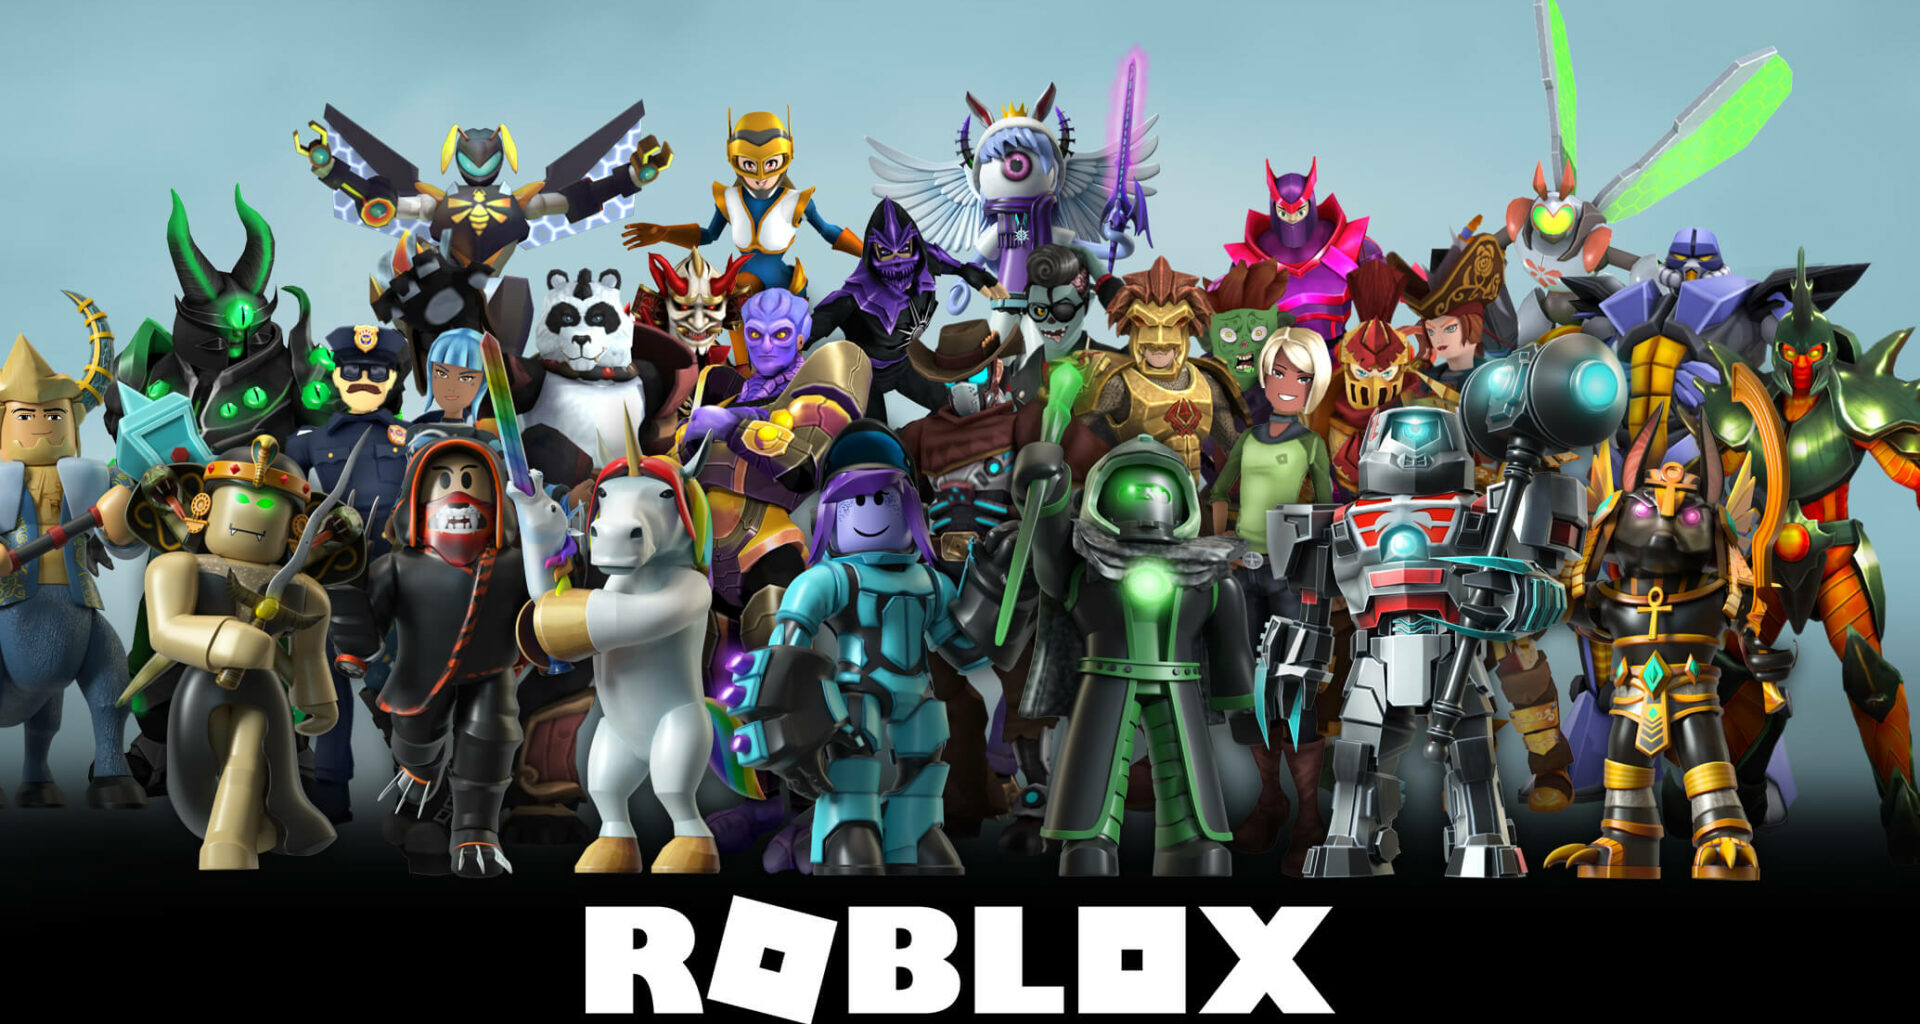 Download Roblox Apk For Free If You Can T Get Minecraft Apk Legally - roblox apk ipad